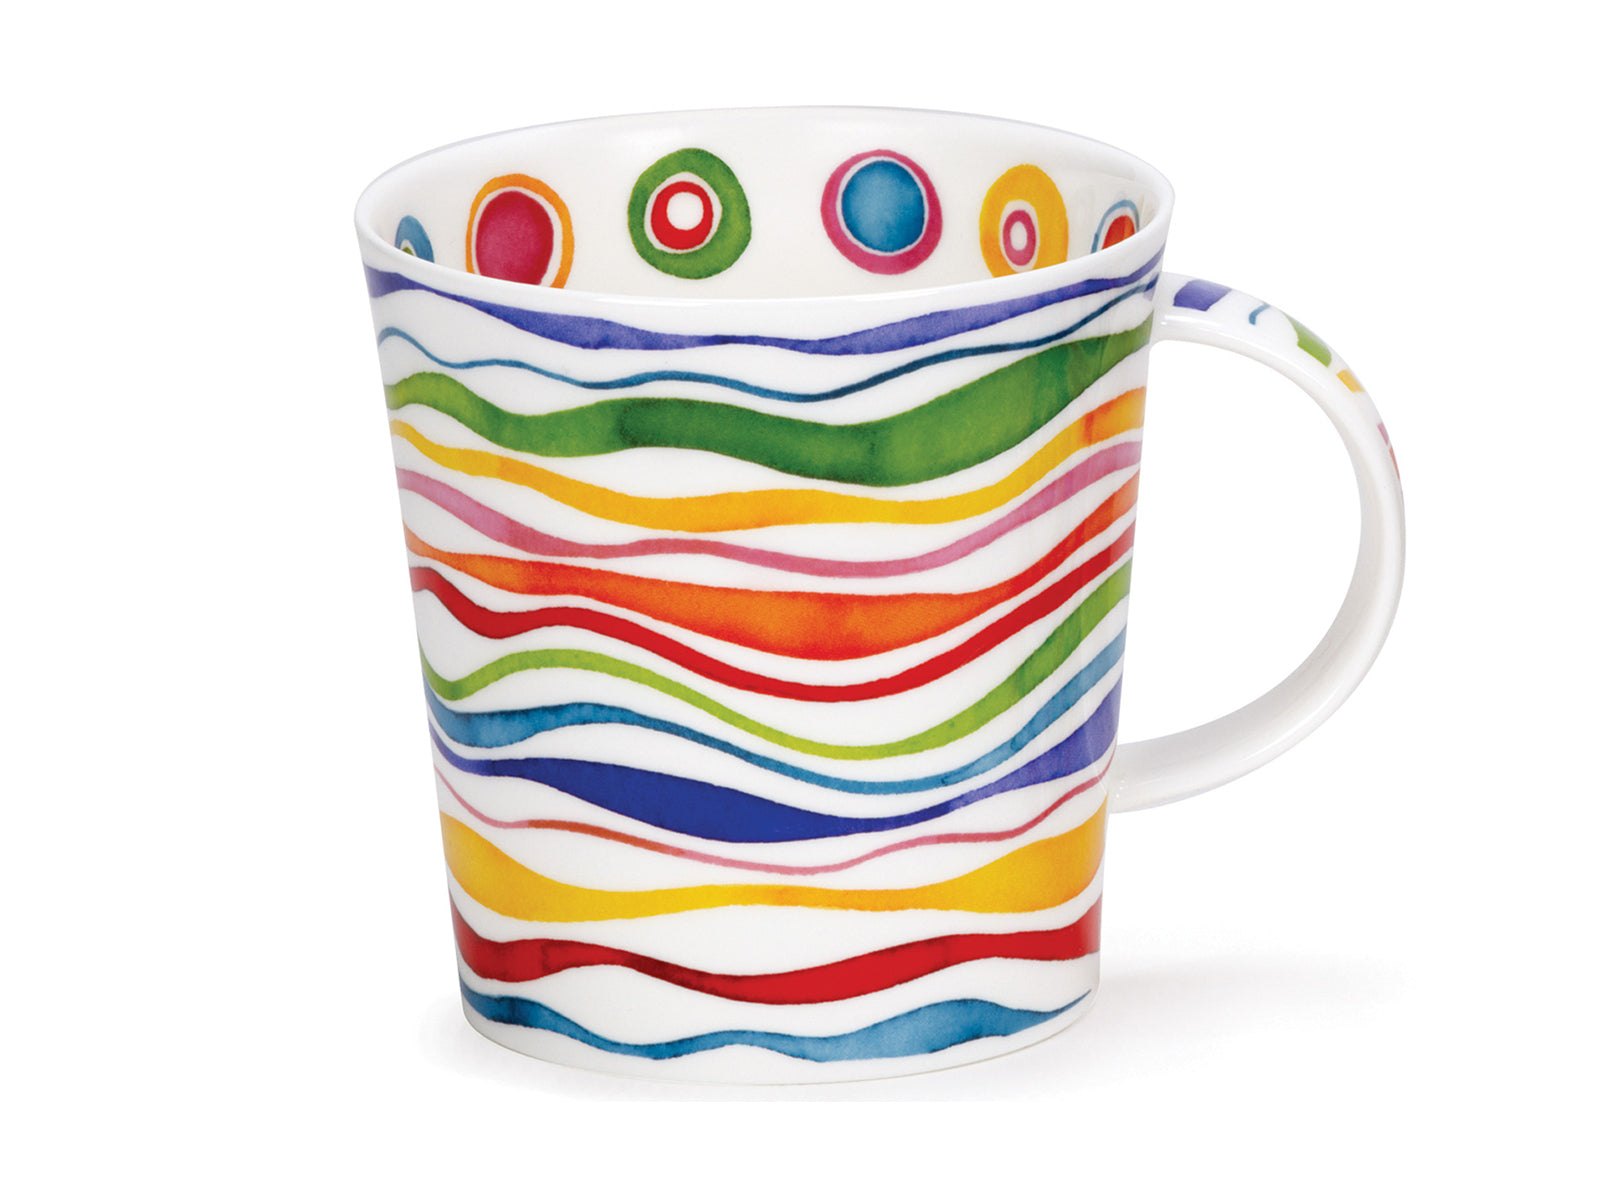 This Dunoon Cairngorm Ripple Mug is made of a fine bone china and has a colourful wave pattern flowing around its exterior in all range of bright colours. Around the interior are colourful rings to add a further vibrancy.